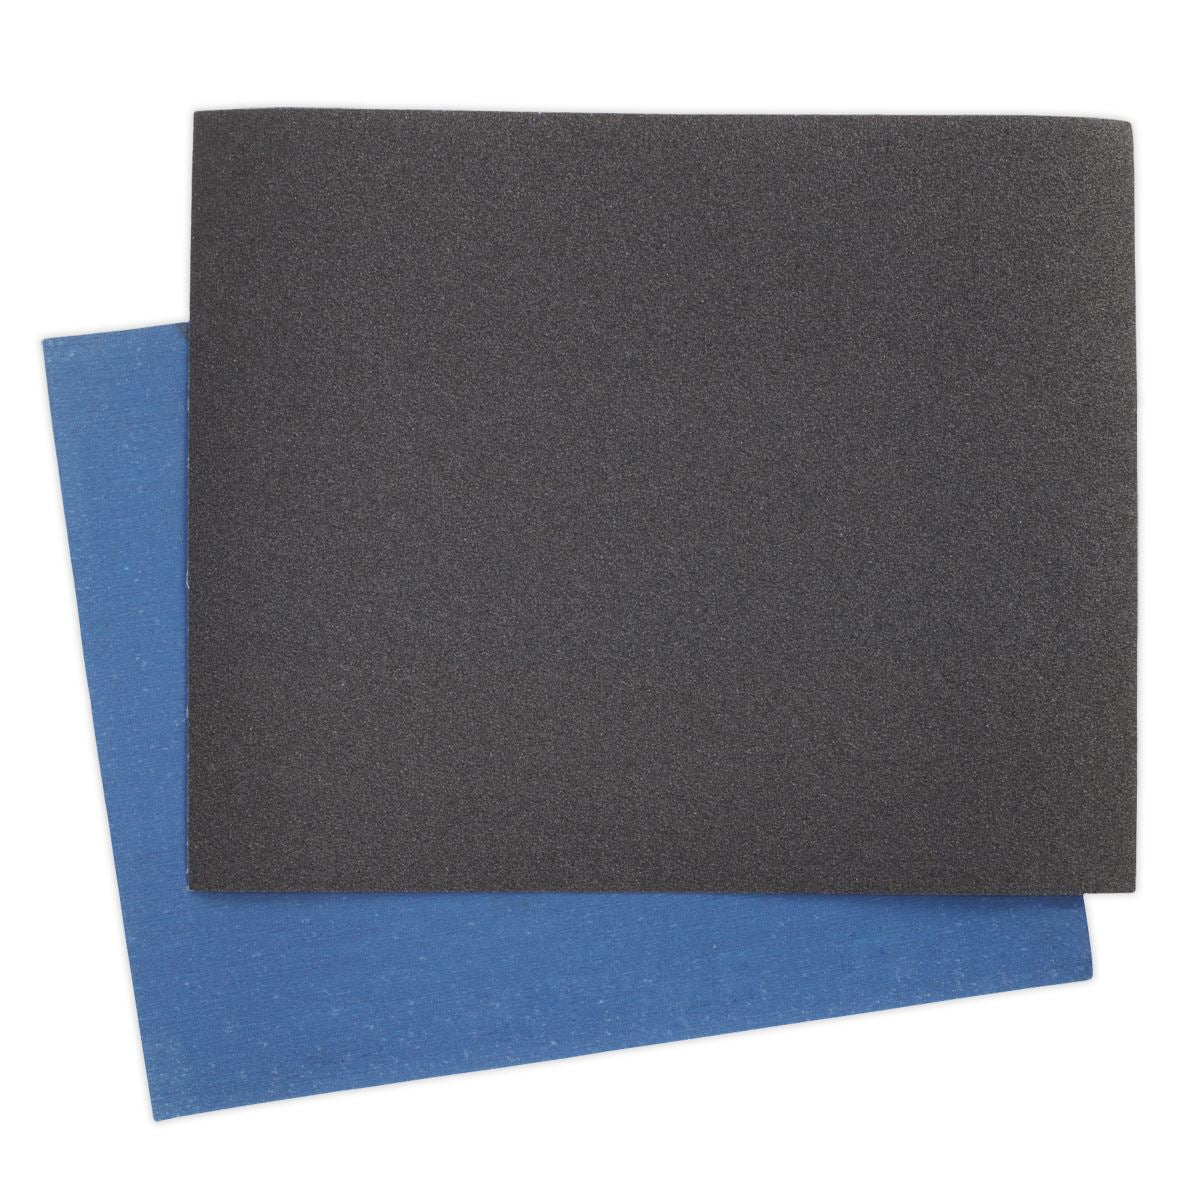 Sealey Emery Sheet Blue Twill 230 x 280mm 150Grit Pack of 25